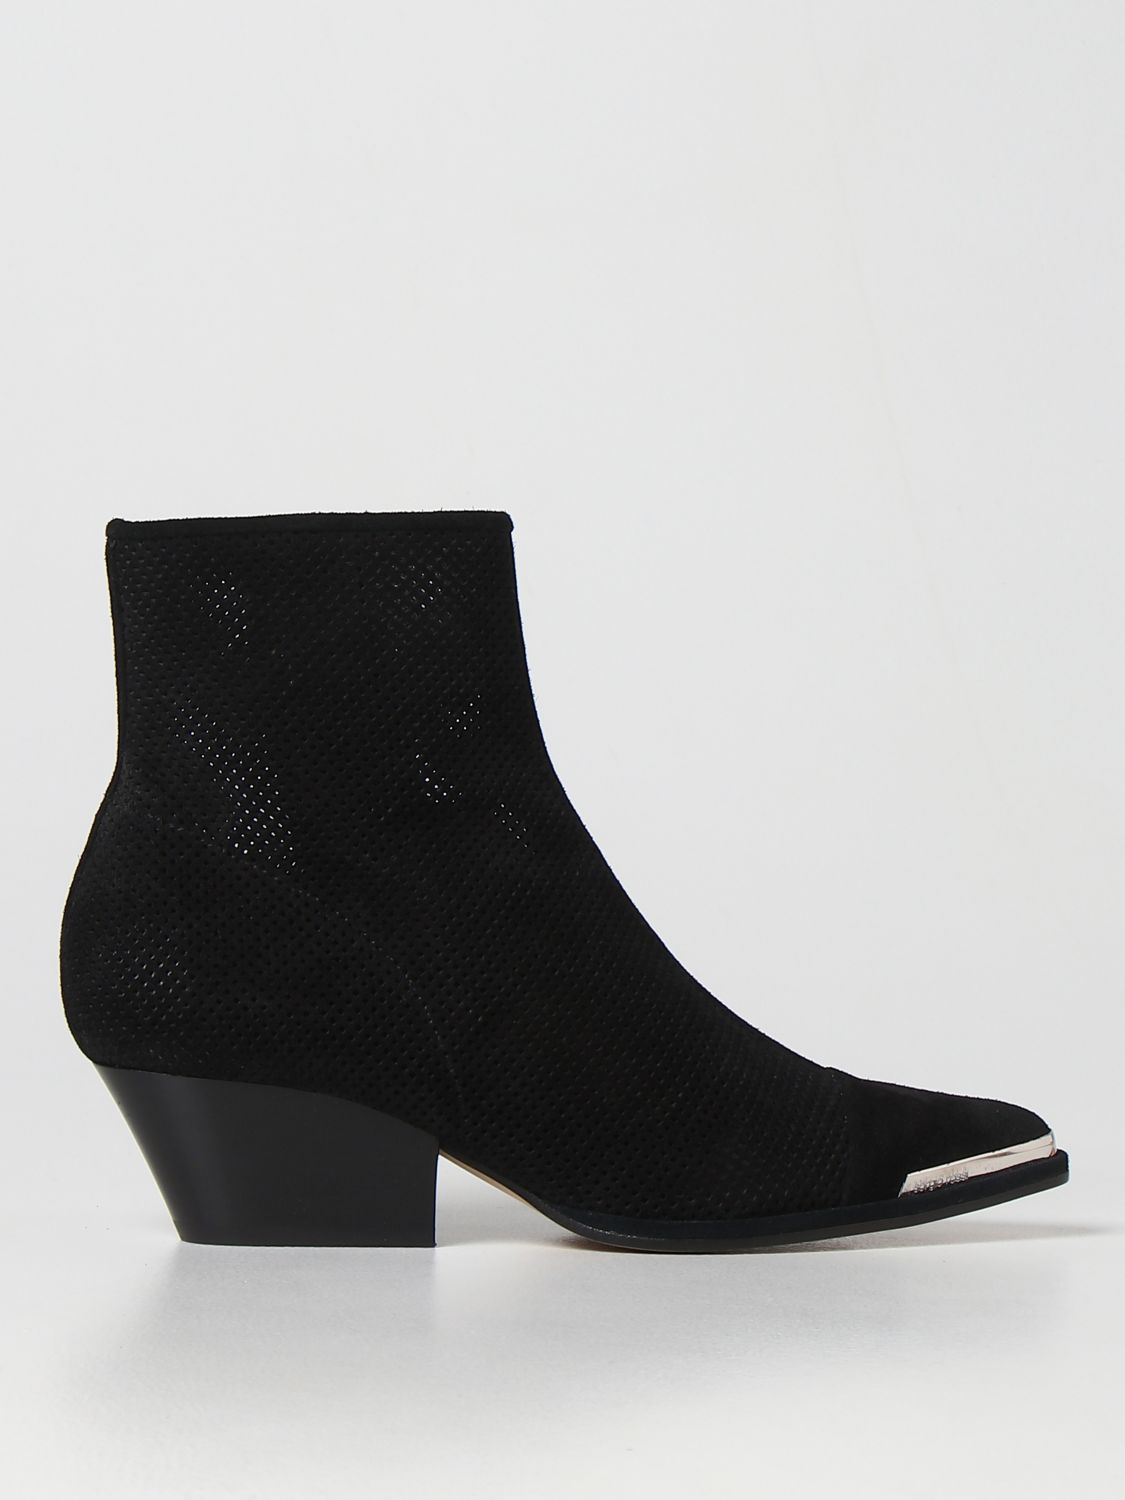 SERGIO ROSSI: Carla perforated suede camperos ankle boots - Black ...